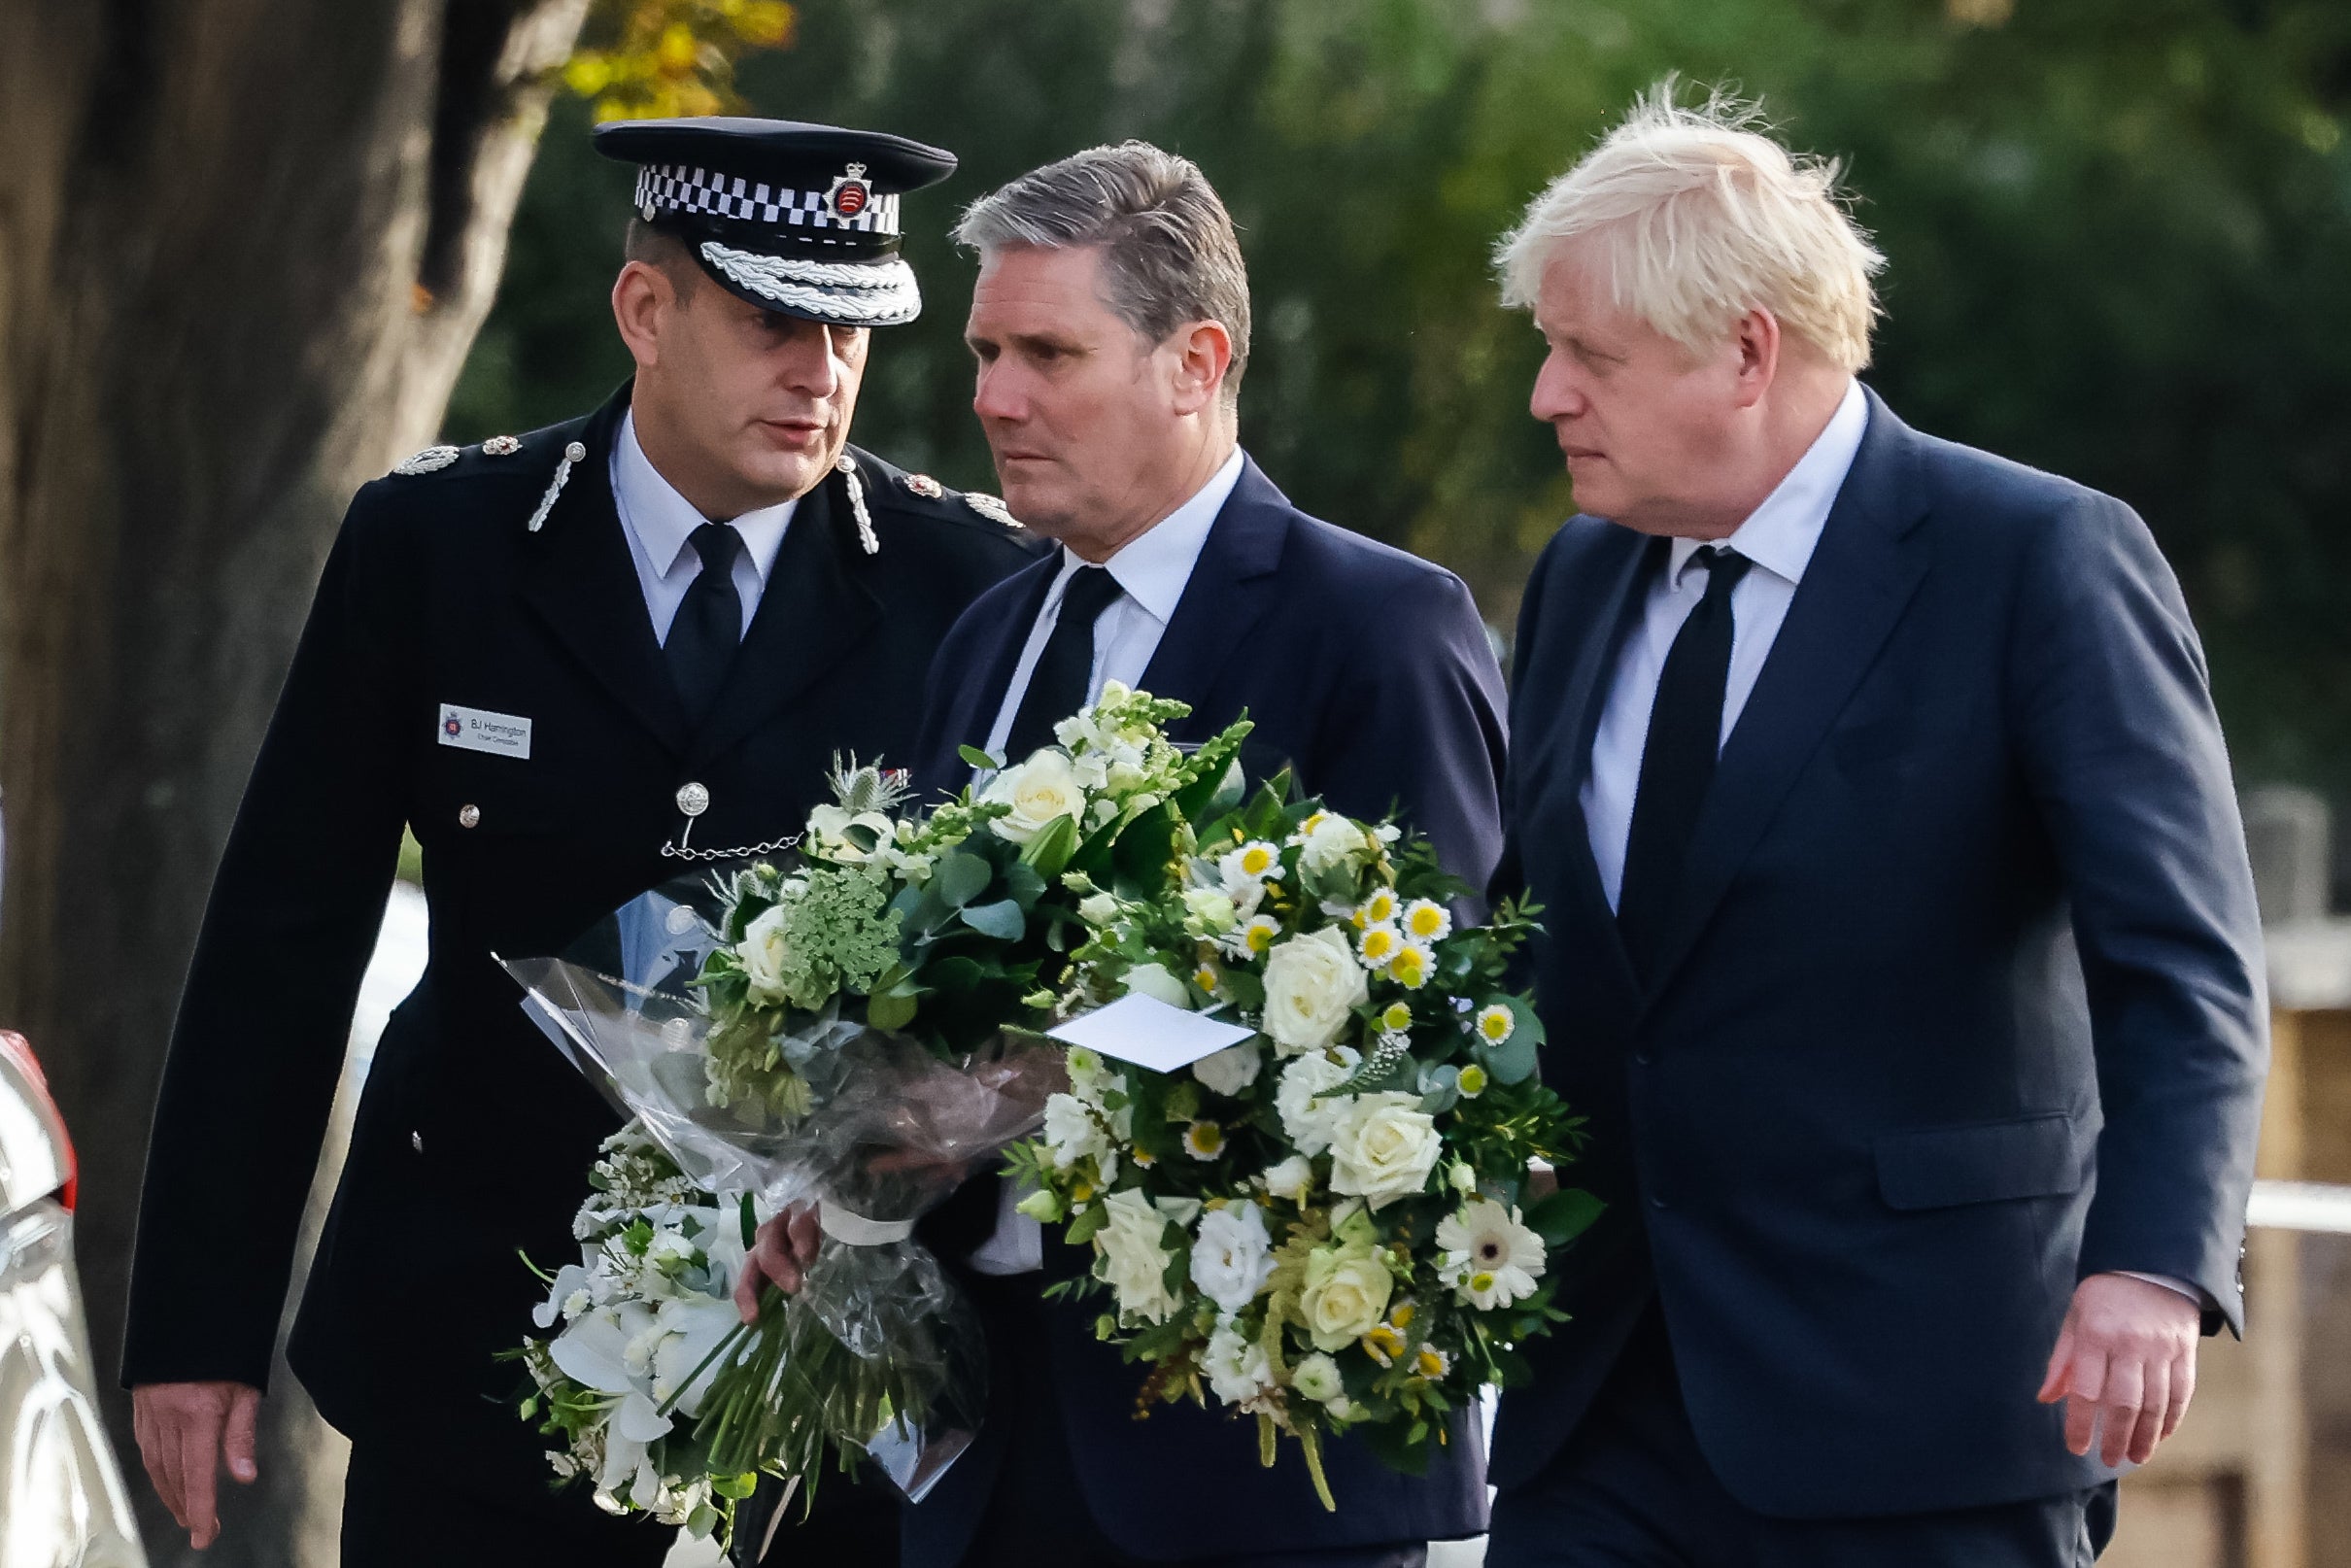 Chief Constable Ben-Julian Harrington, Labour Party leader Sir Keir Starmer and Prime Minister Boris Johnson arriving at the scene near the Belfairs Methodist Church in Eastwood Road North, Leigh-on-Sea, Essex, where Conservative MP Sir David Amess was killed